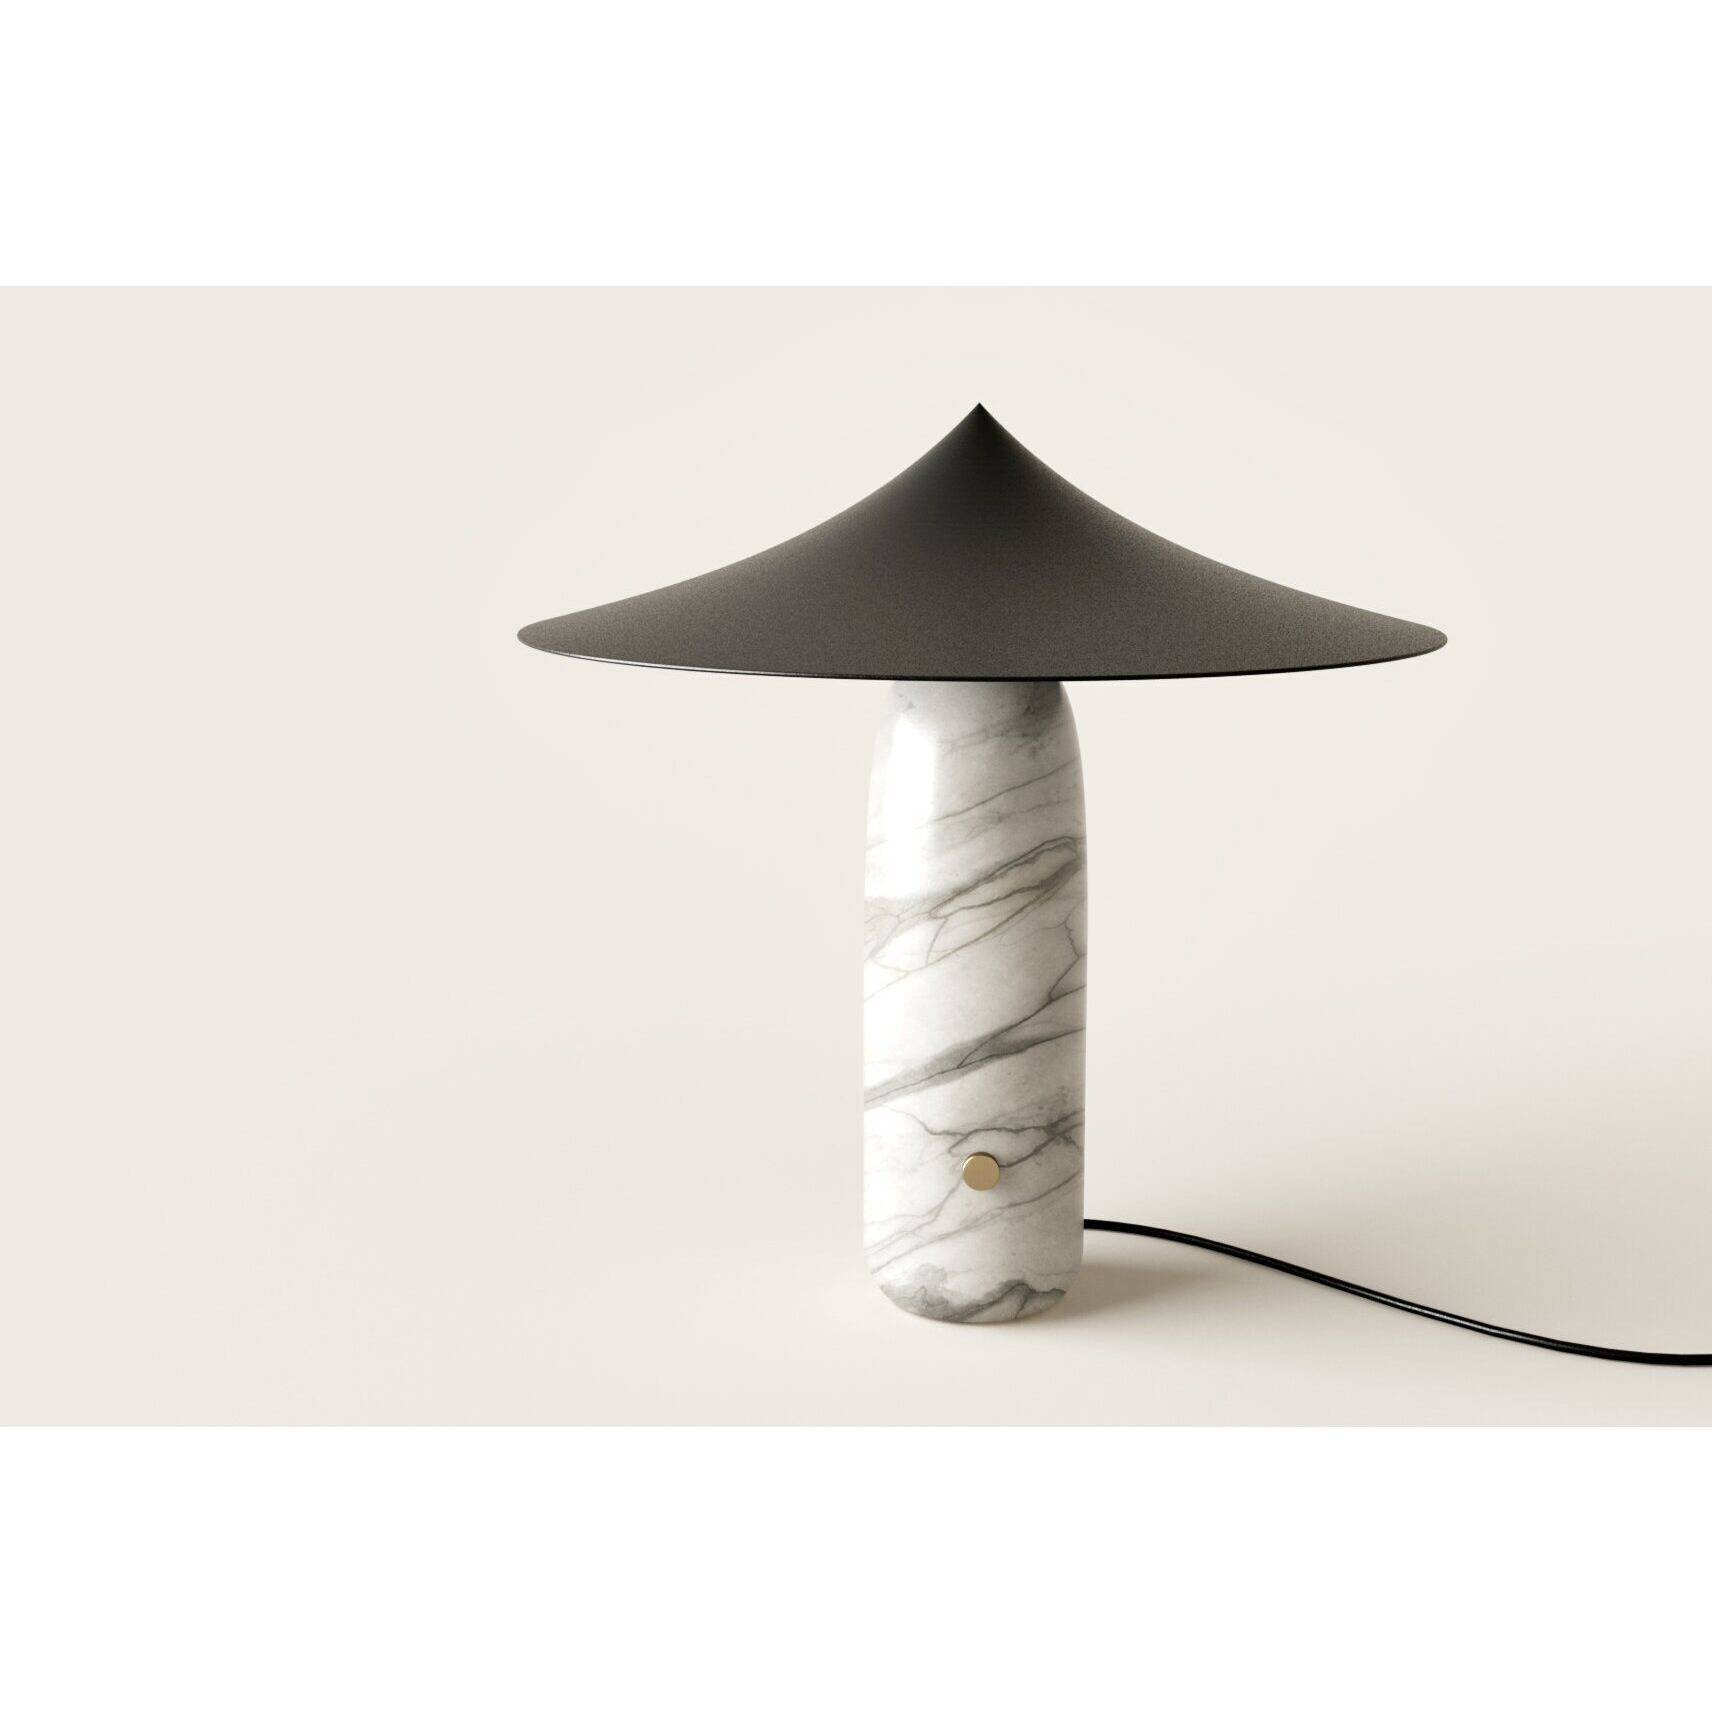 "Tae LED Marble Table Lamp with Black Shade, White Marble / Black "